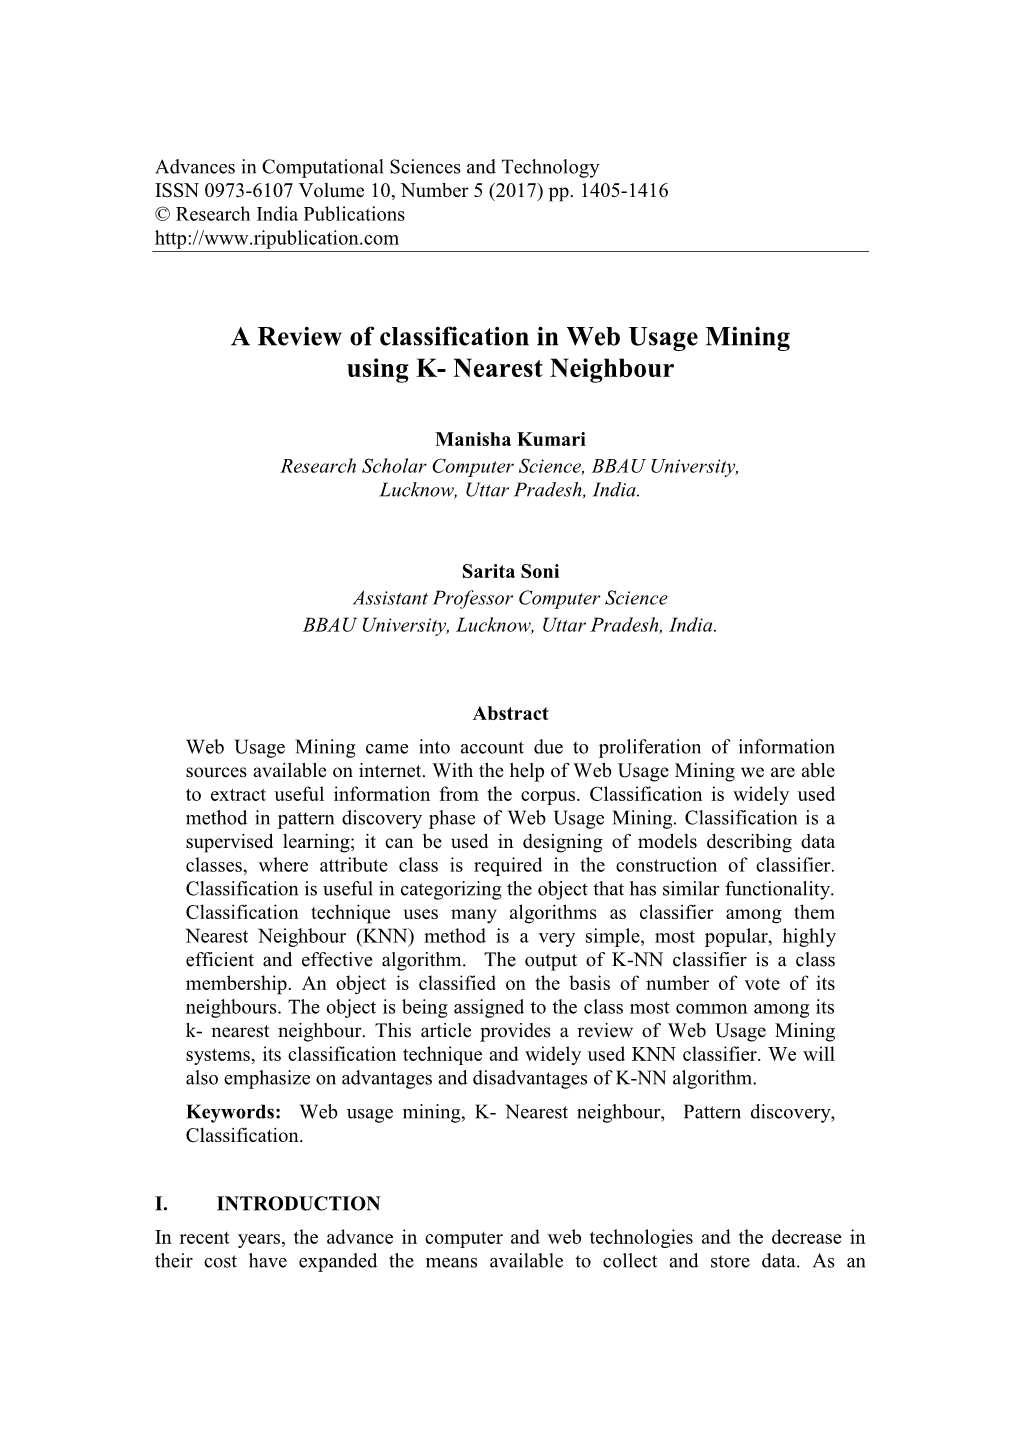 A Review of Classification in Web Usage Mining Using K- Nearest Neighbour